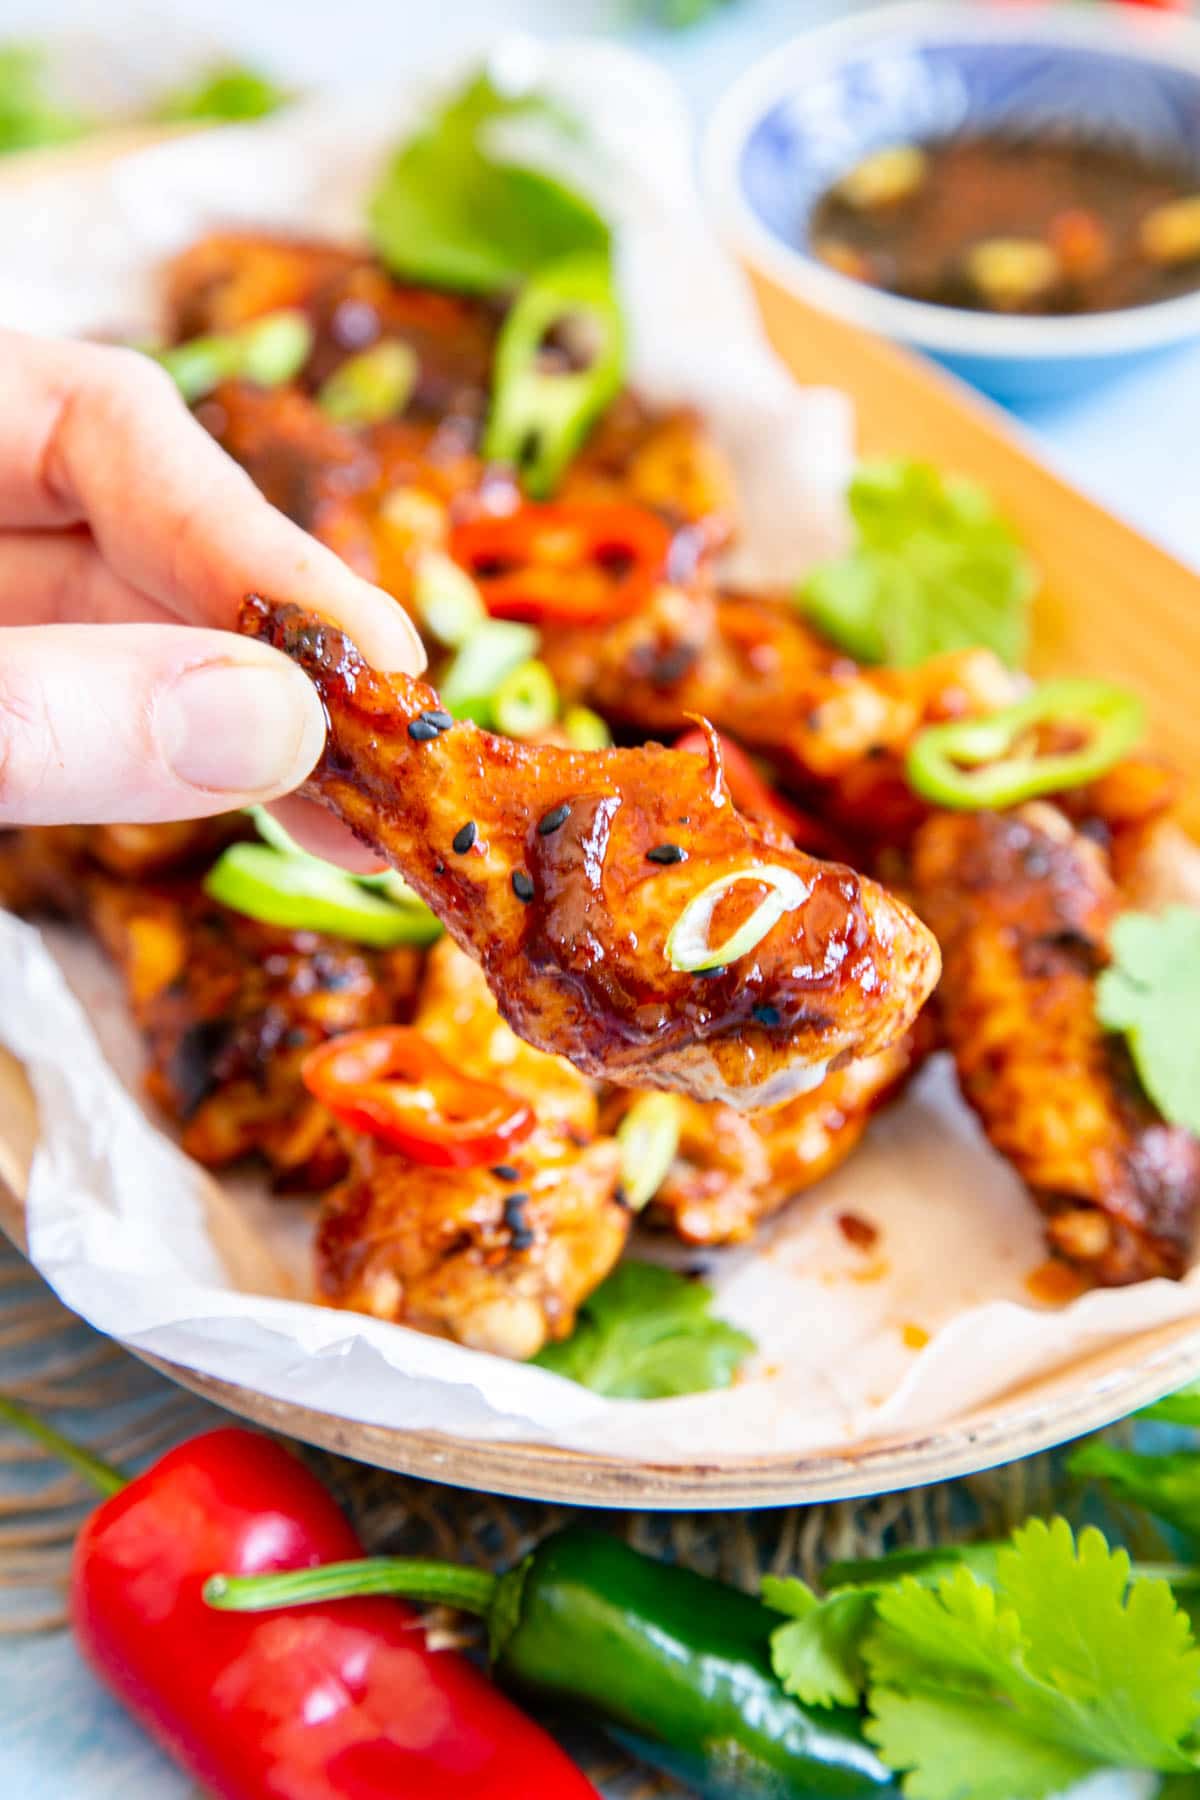 A hand holds a sticky Asian chicken wing above a wooden serving dish filled with more wings.